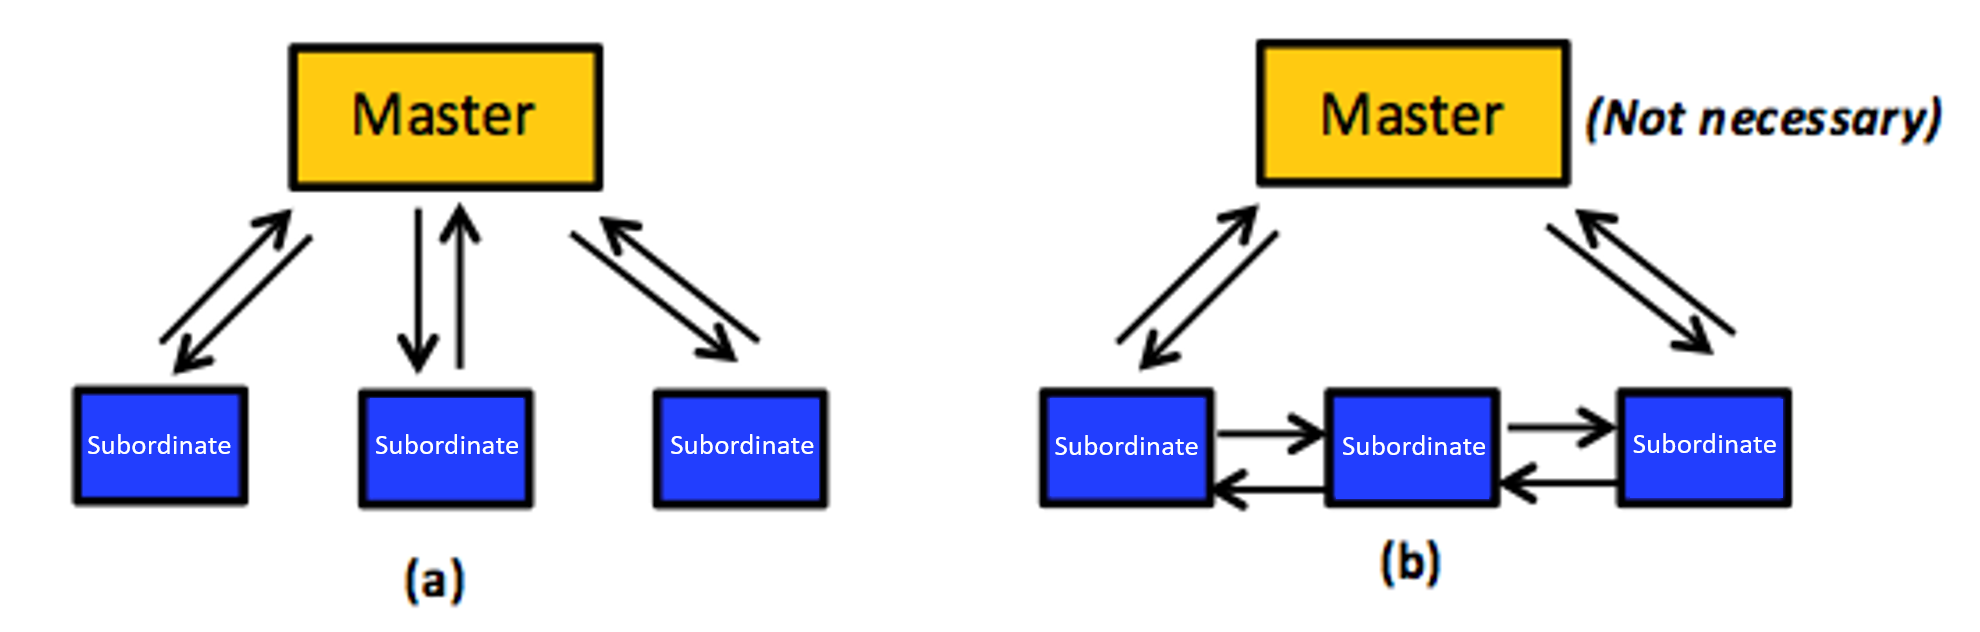 (a) A primary-subordinate organization. (b) A peer-to-peer organization. The primary in such an organization is optional (usually employed for monitoring the system and/or injecting administrative commands).